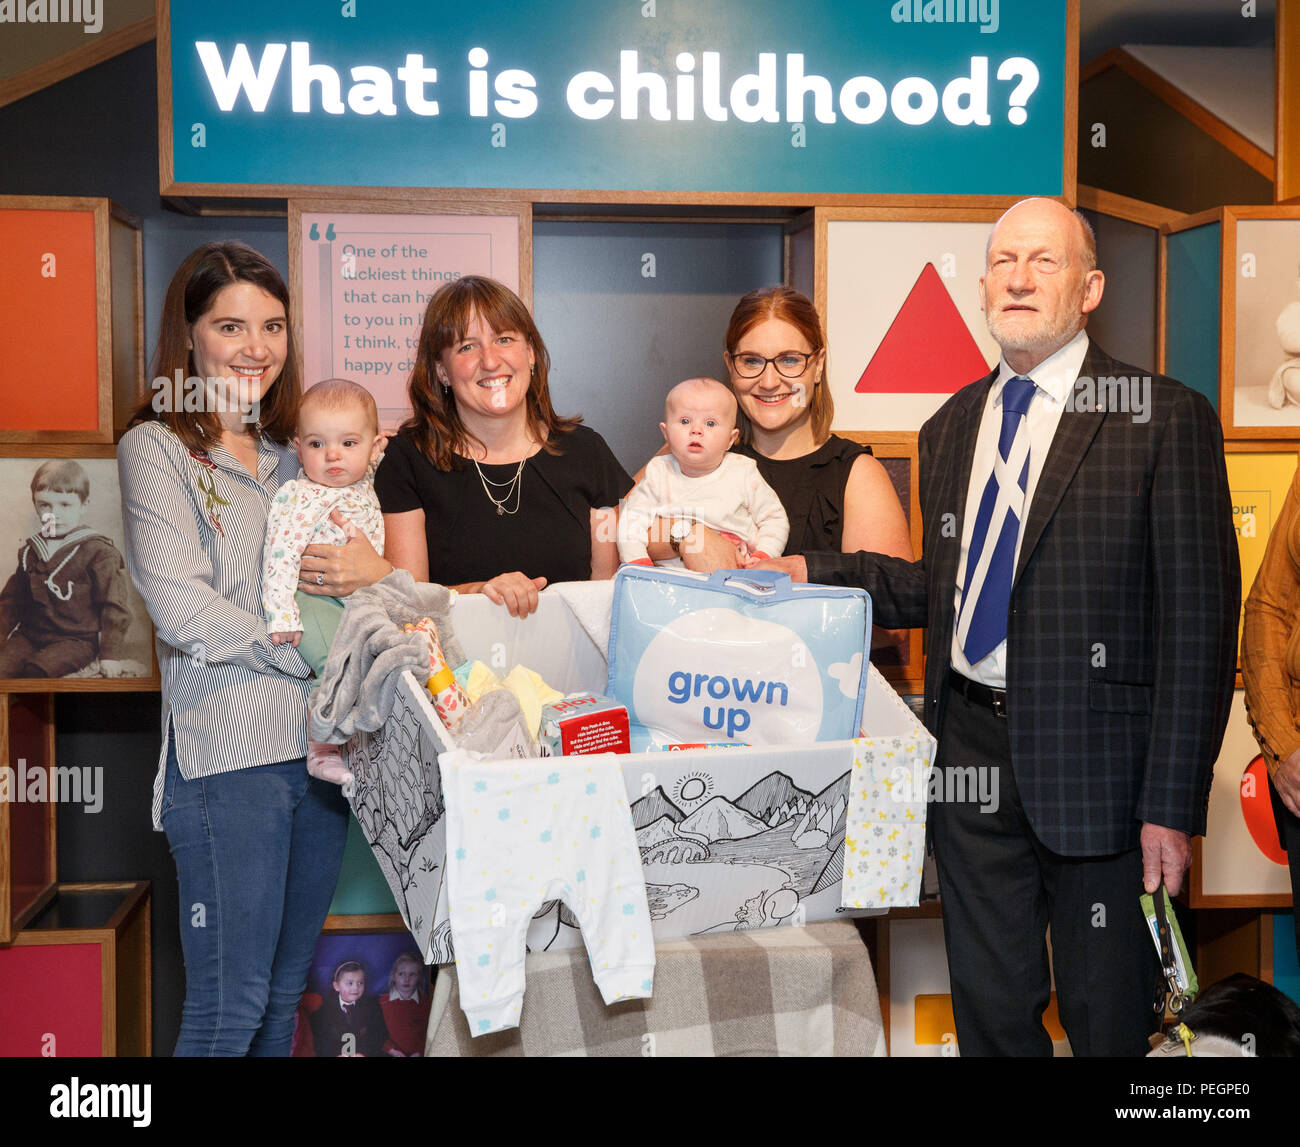 Maree Todd (second left), Minister for Children and Young People, with (left to right) Sarah Morrison and daughter Chrissie, Gillian Steele with daughter Erin and Councillor Derek Howie, marks the first anniversary of the Baby Box initiative at the Museum of Childhood, as one of the boxes is to be preserved in history as an exhibit at the Edinburgh attraction. Stock Photo